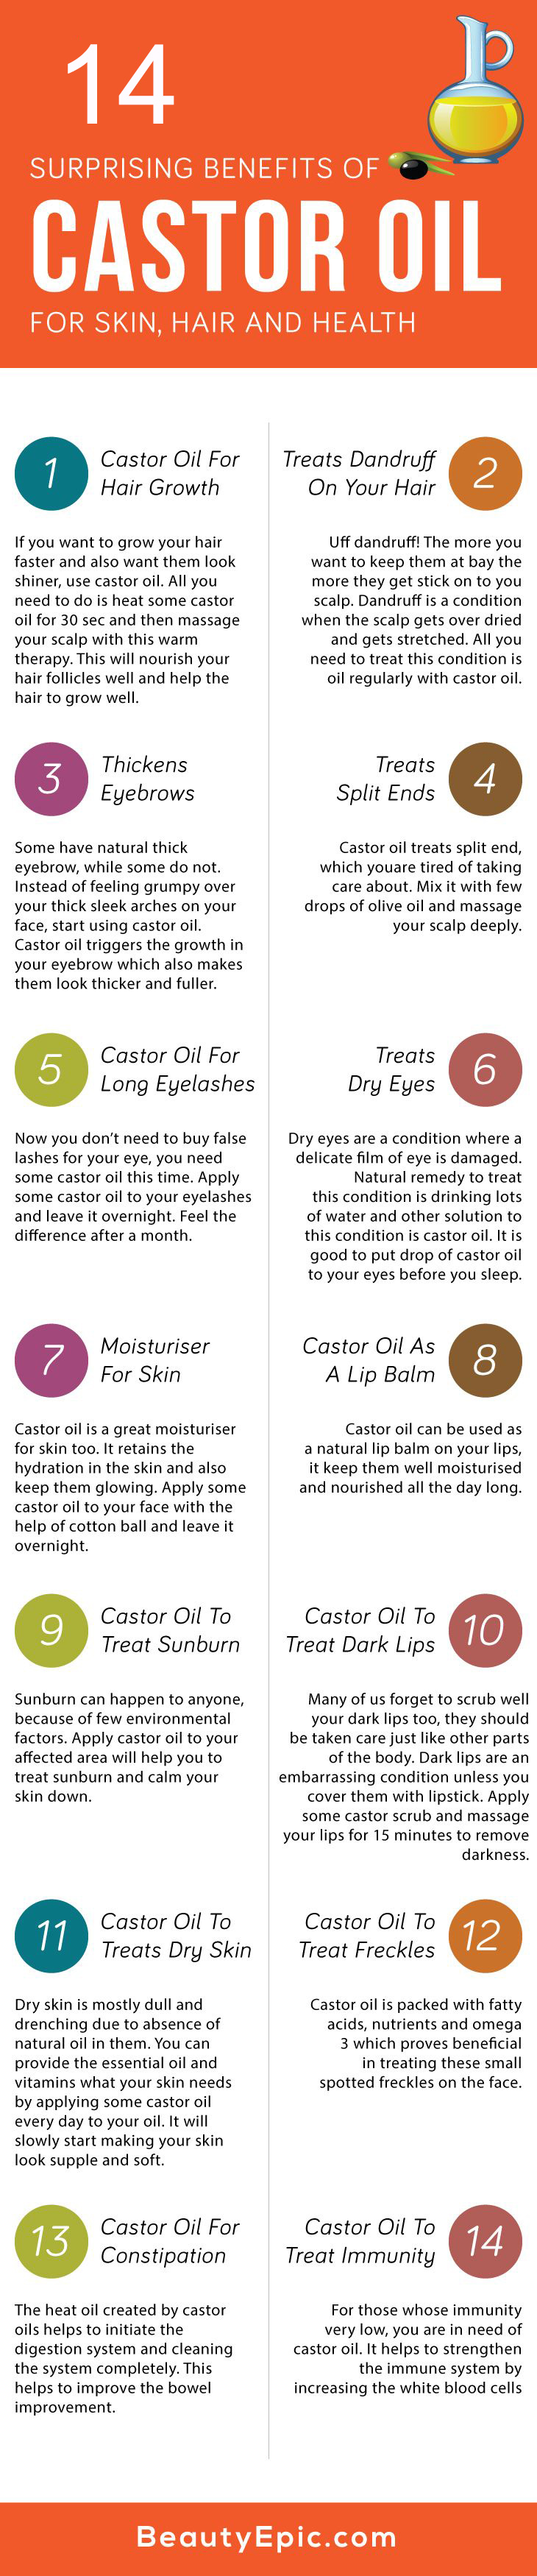 Castor Oil And Its 14 Surprising Benefits For Your Health Infographic